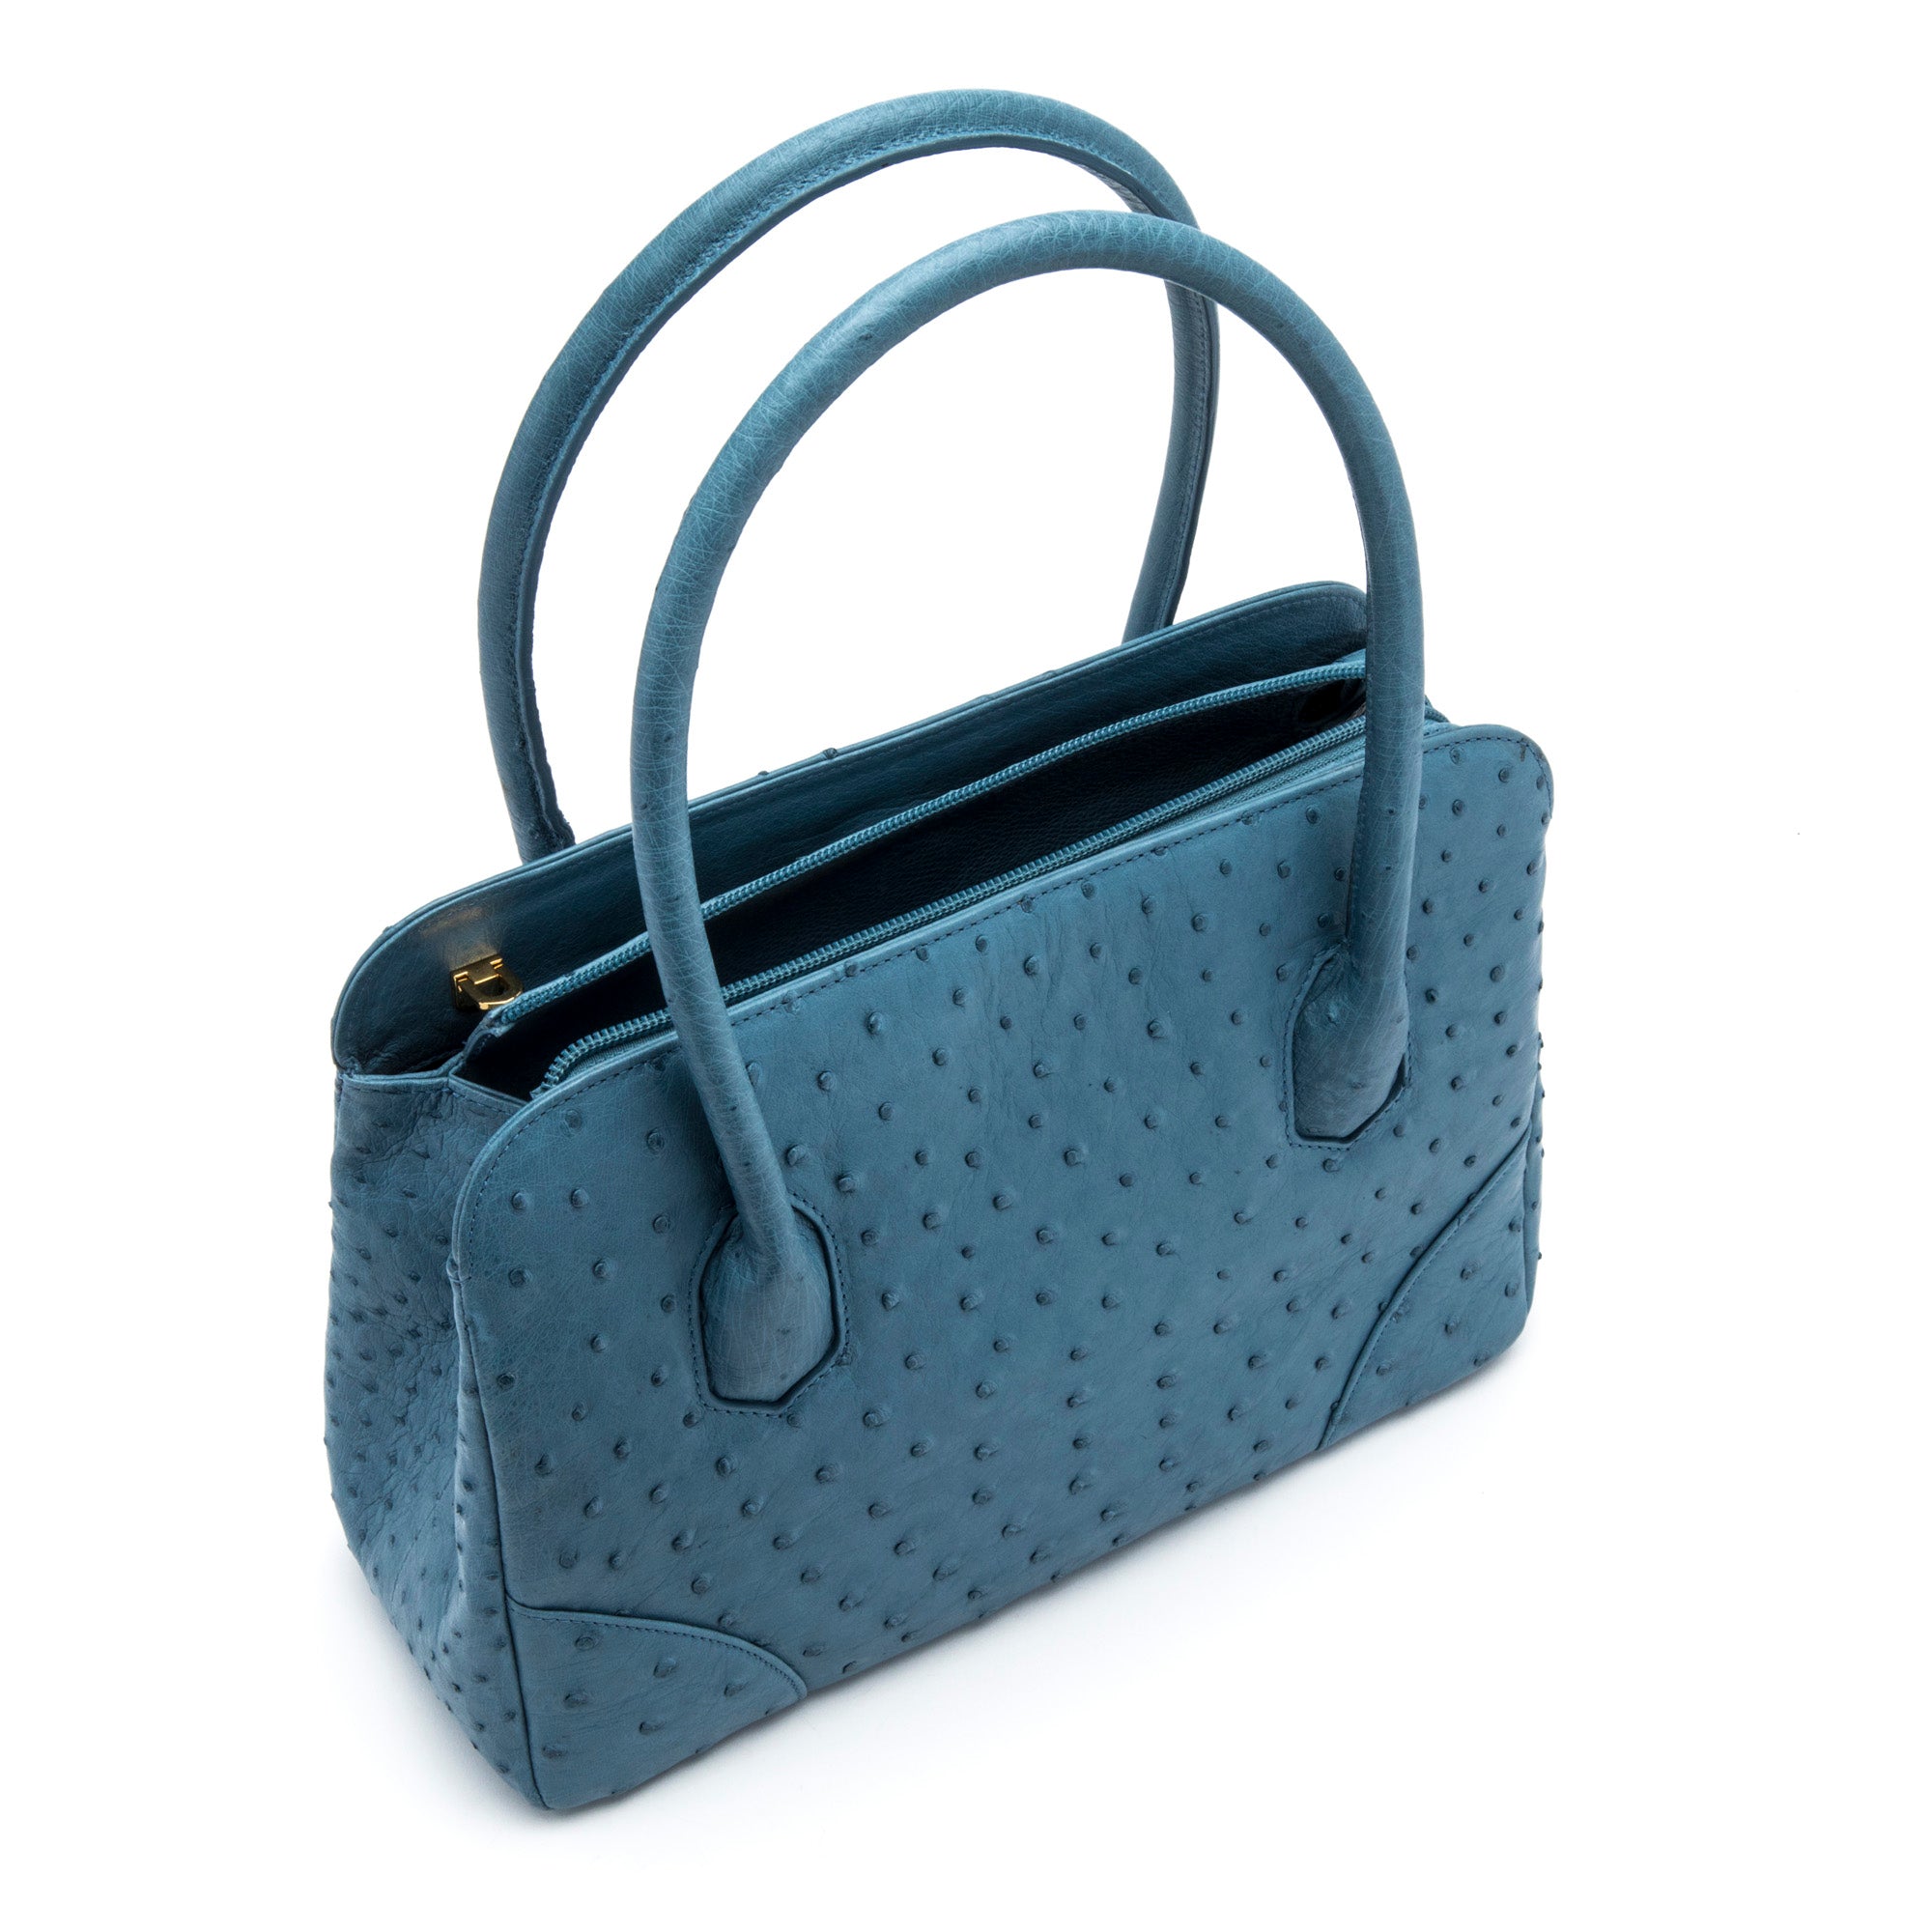 Baby Jet Tote in Blue Jeans